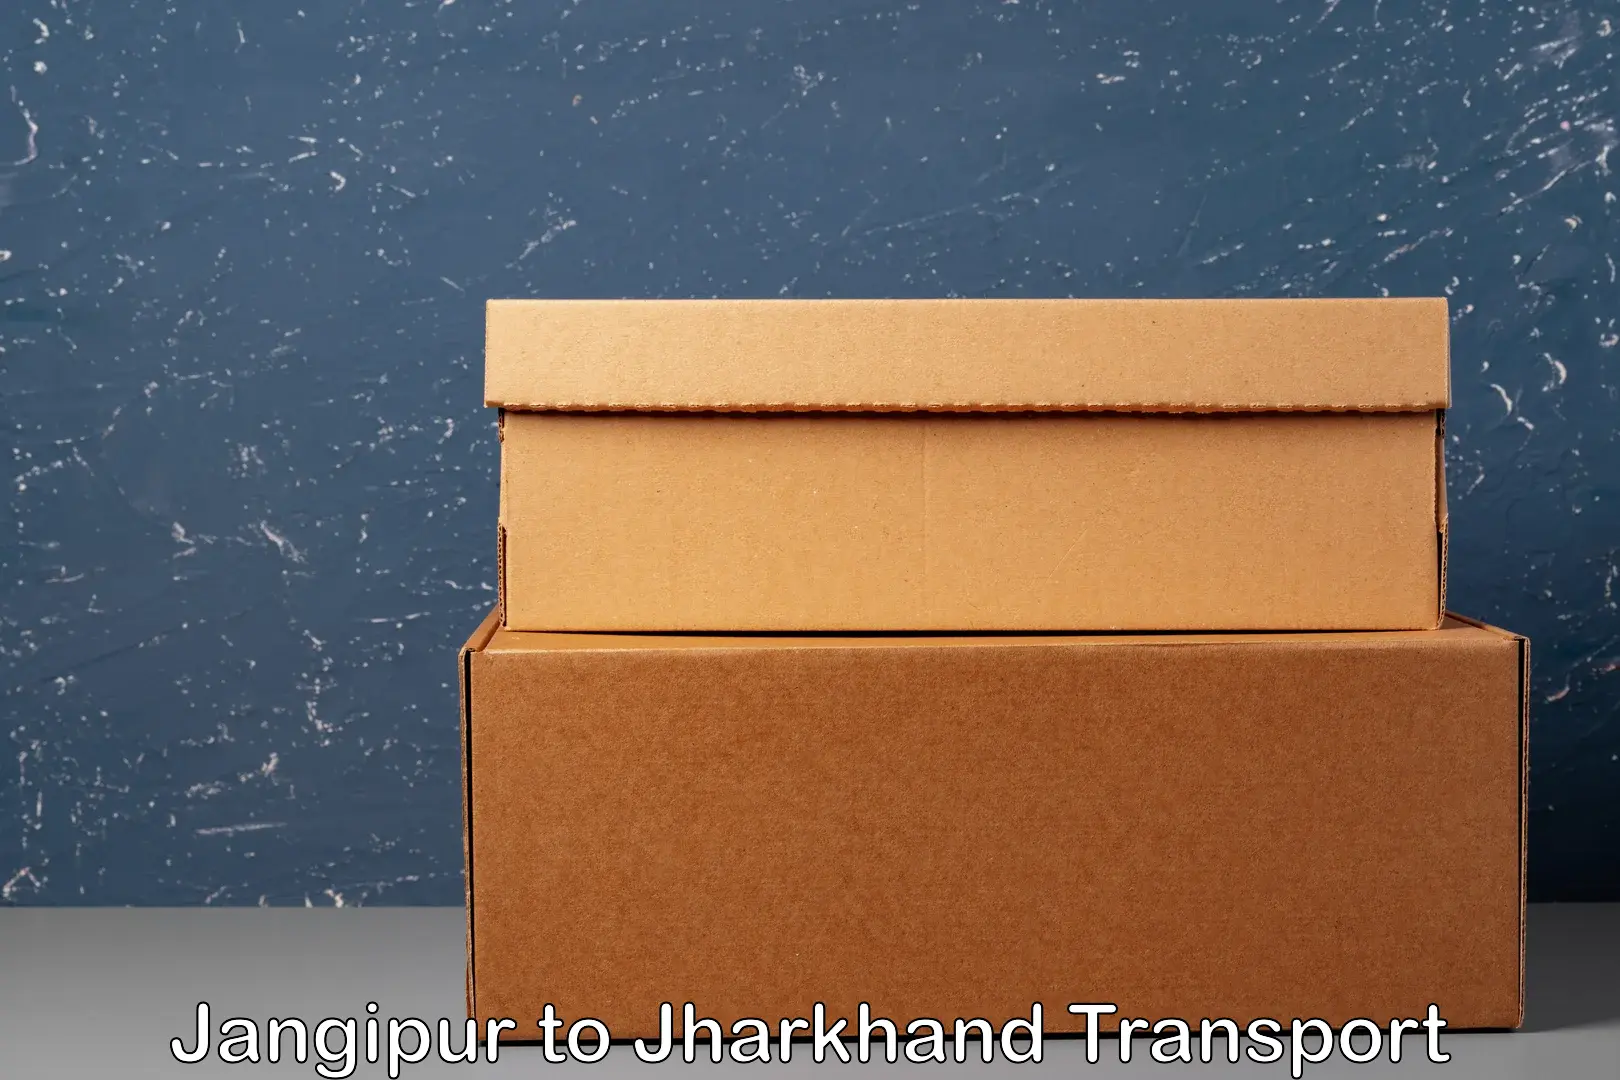 Shipping services in Jangipur to Dhalbhumgarh